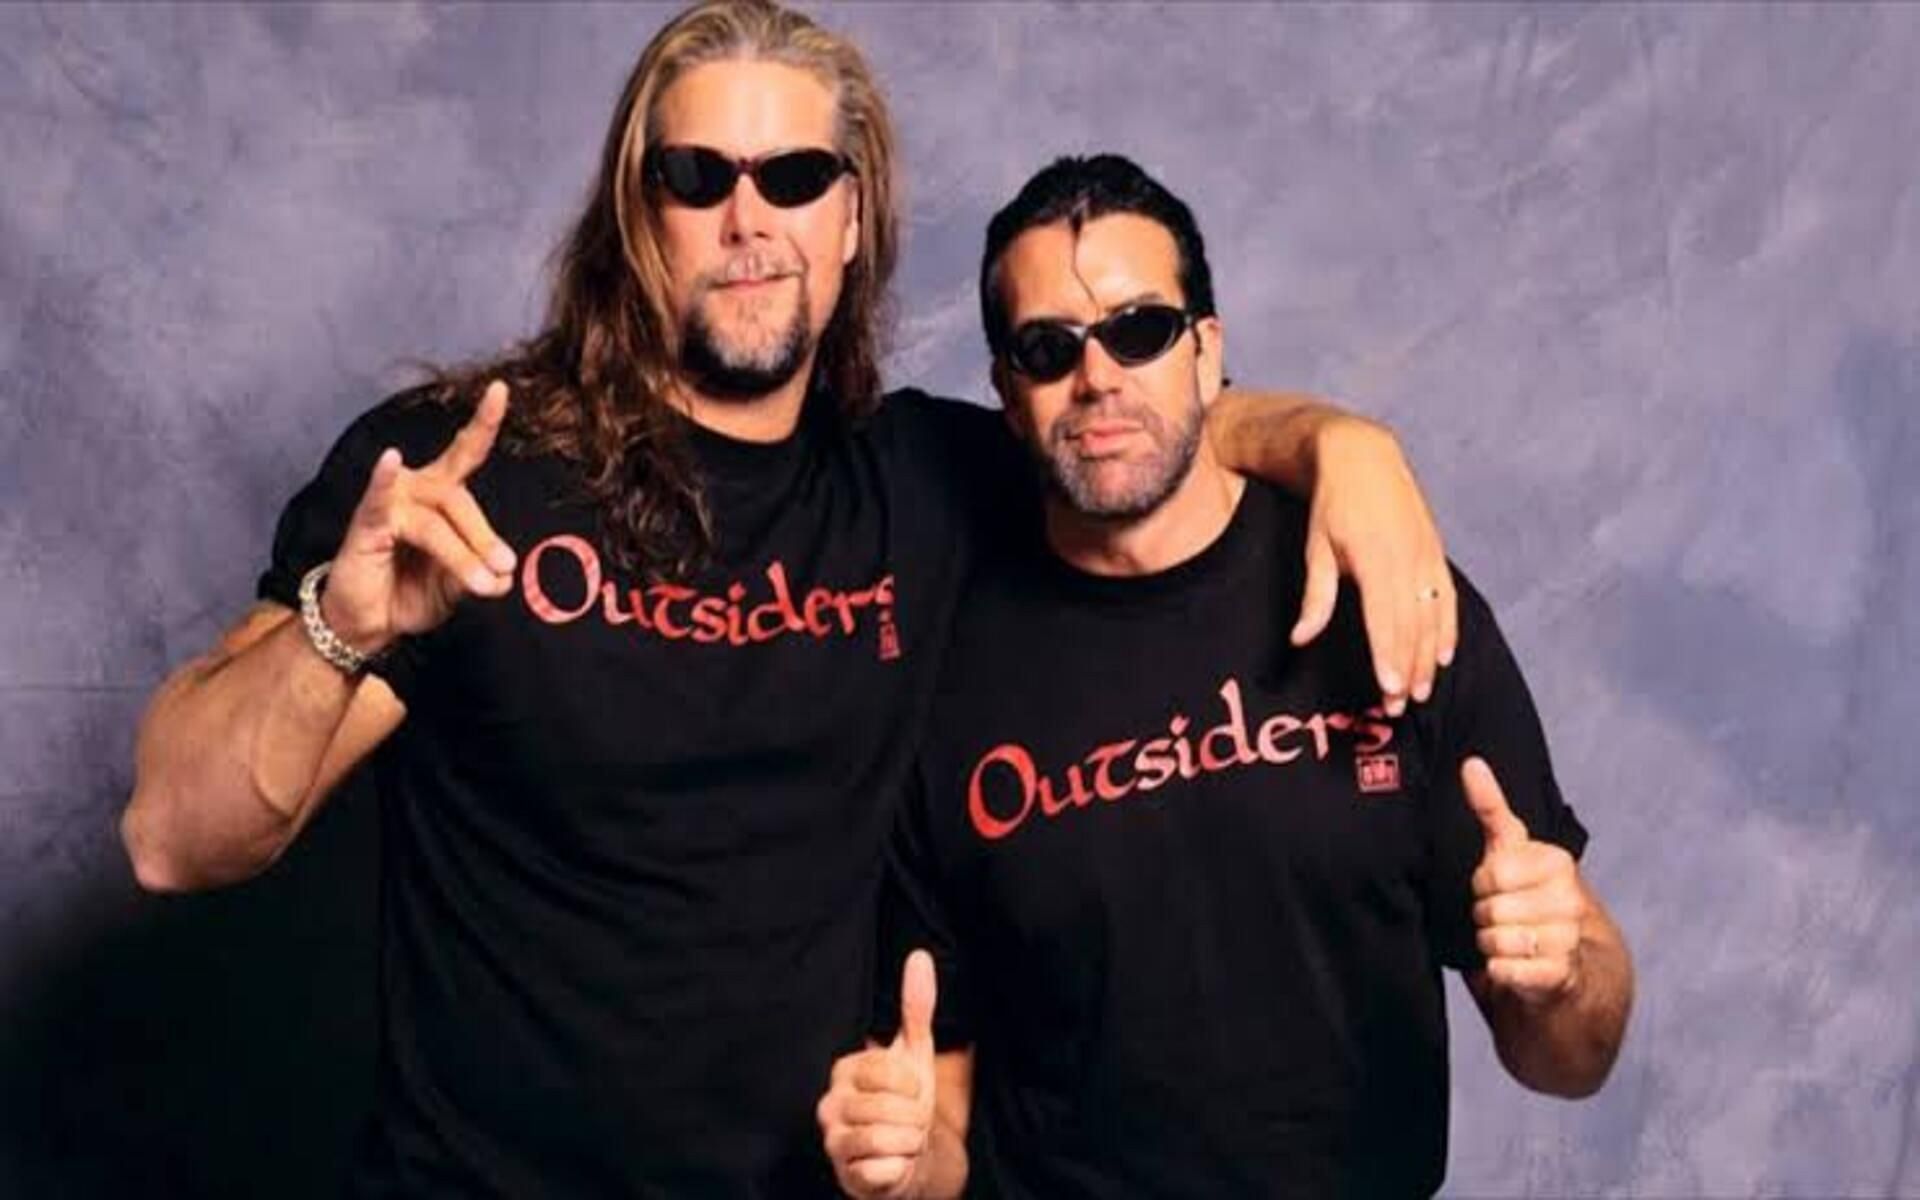 Scott Hall and Kevin Nash teamed up on many occasions.